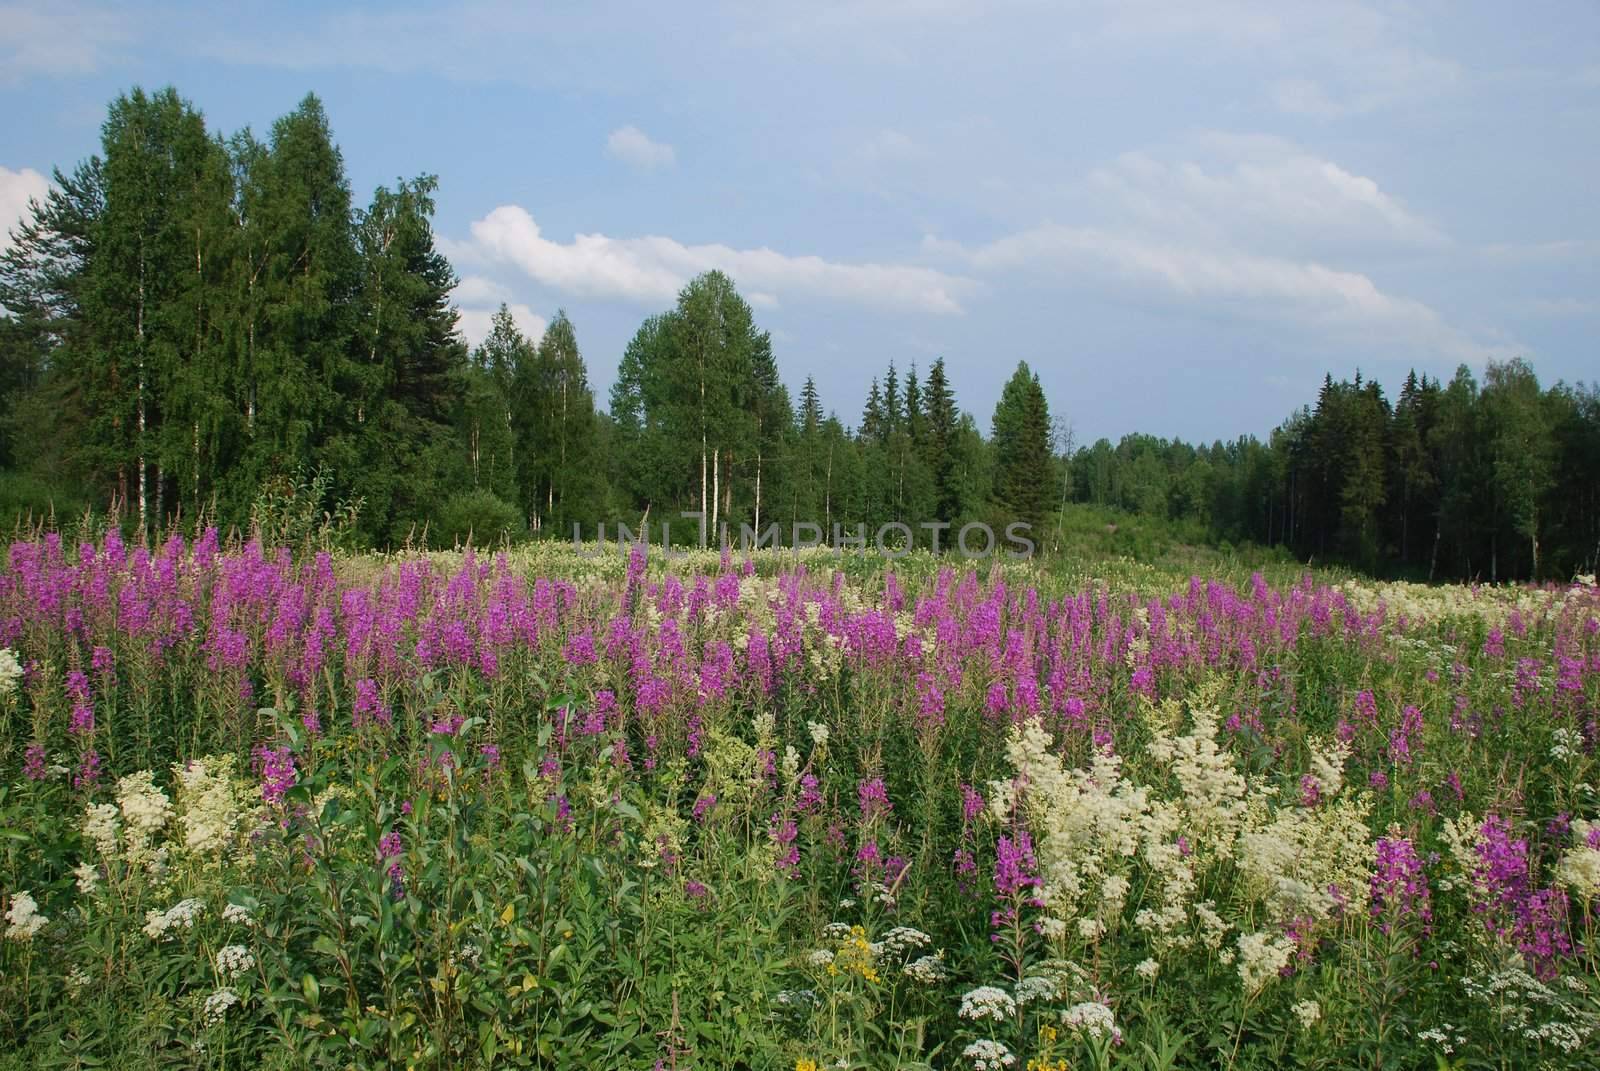 Its th meadow of Wild lupins and many different flowers, surrounded with  birch and coniferous forests in the region of Jyvaskyla, the capital of Central Finland 